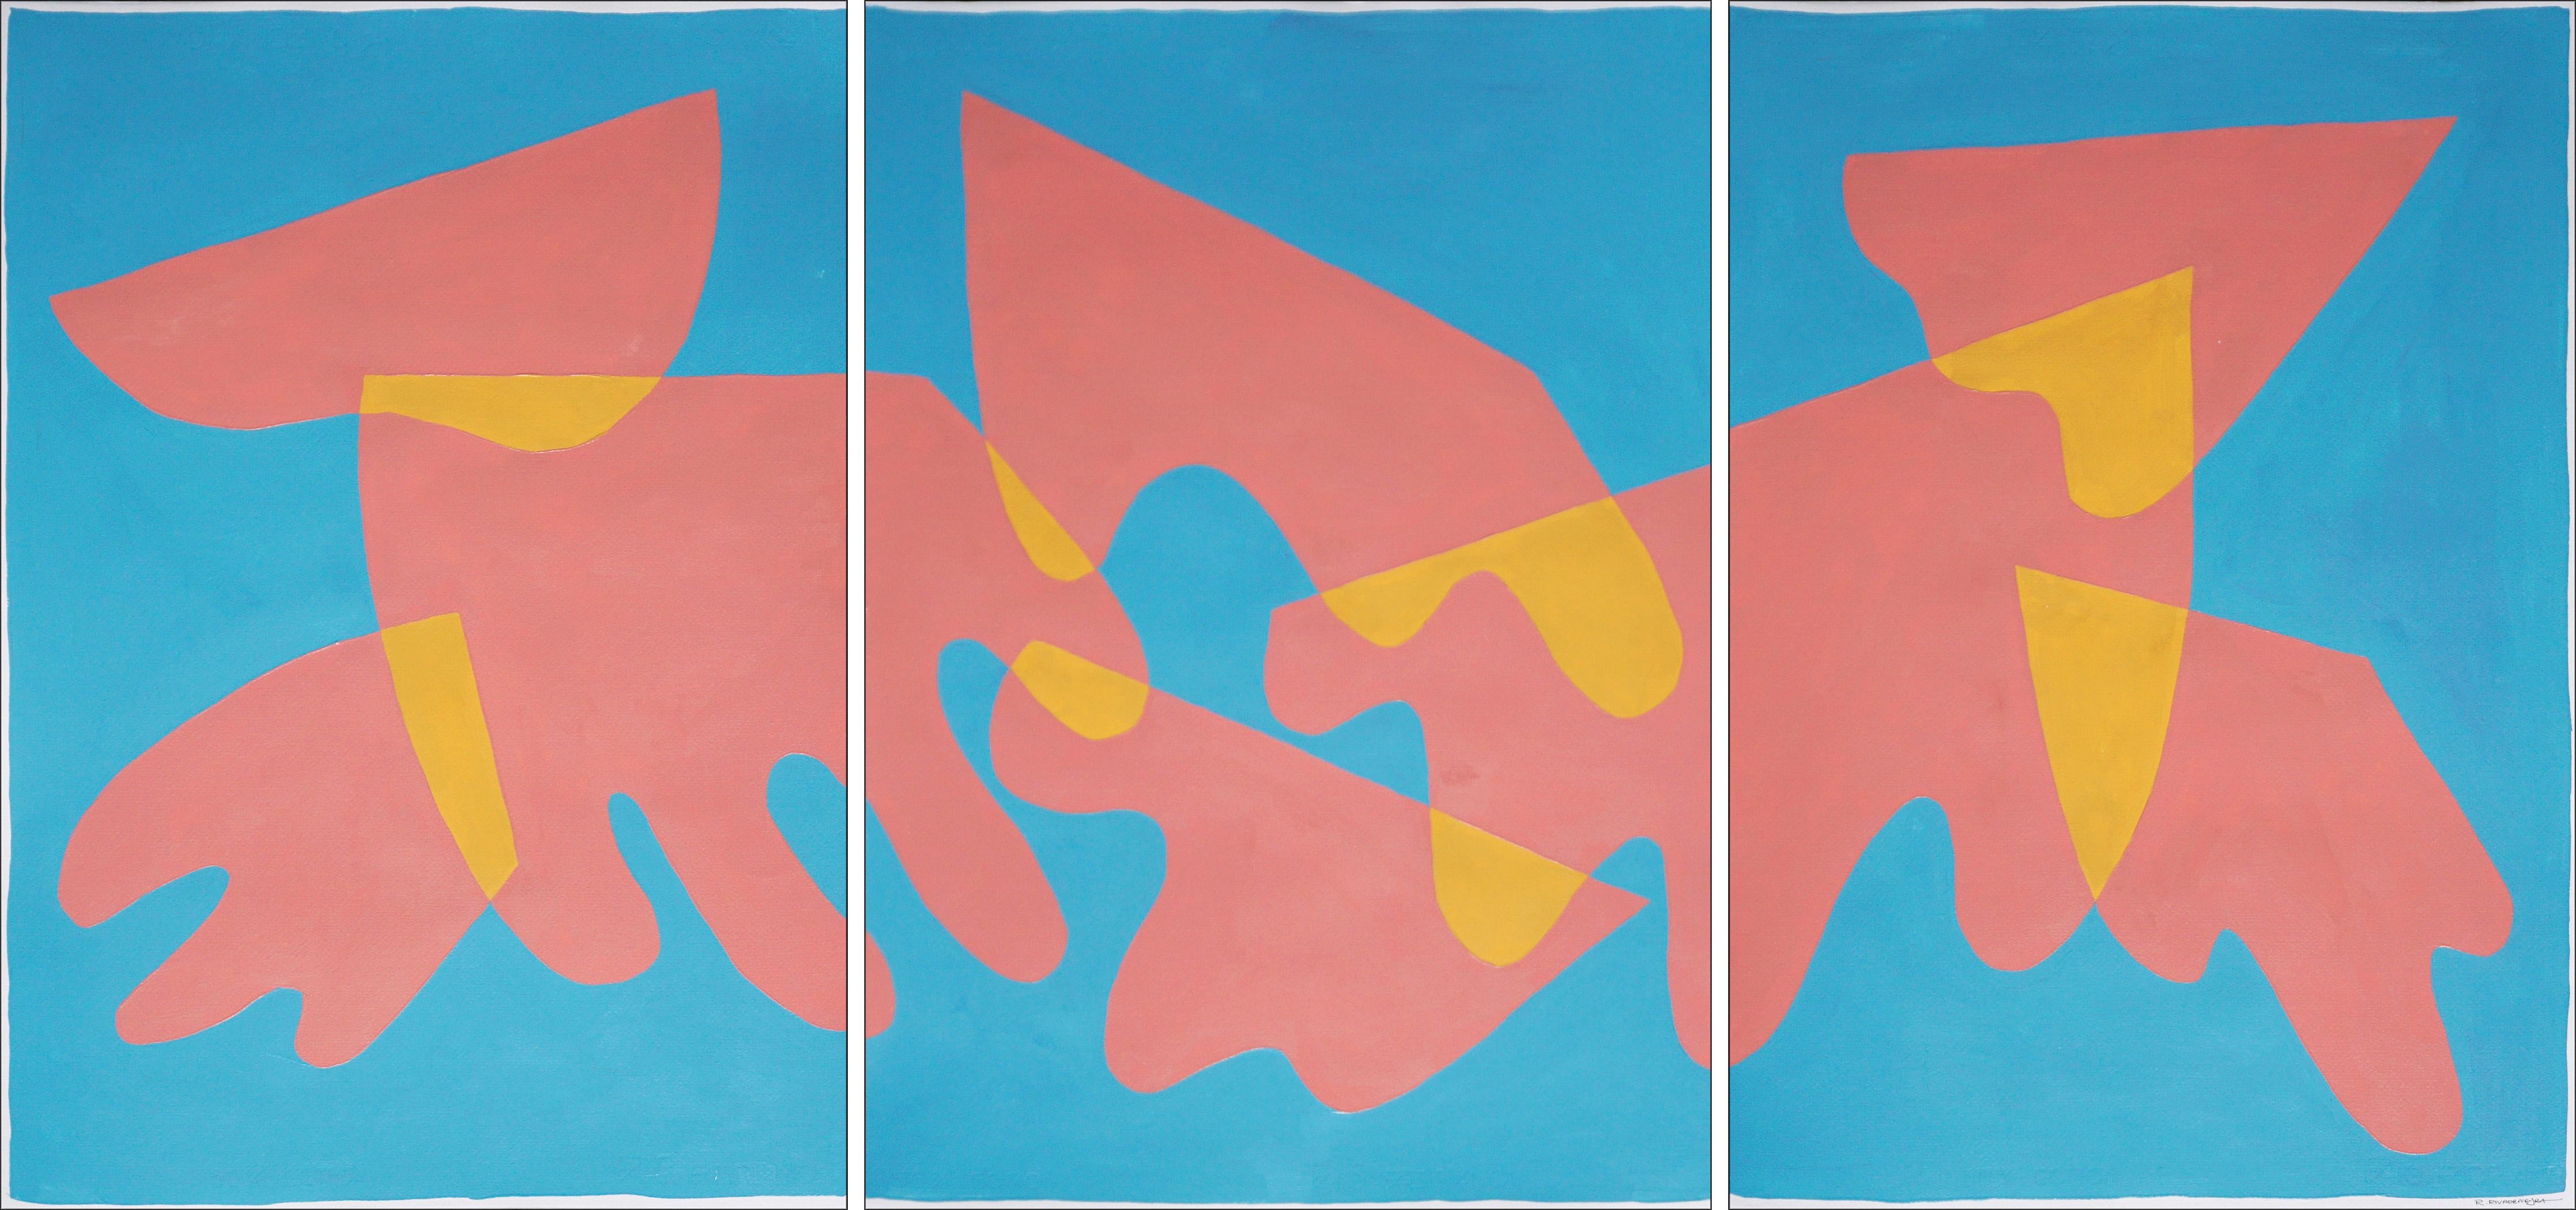 Ryan Rivadeneyra Still-Life Painting - Red Clouds over Blue Sky, Mid-Century Modern Triptych, Organic Shapes, Yellow